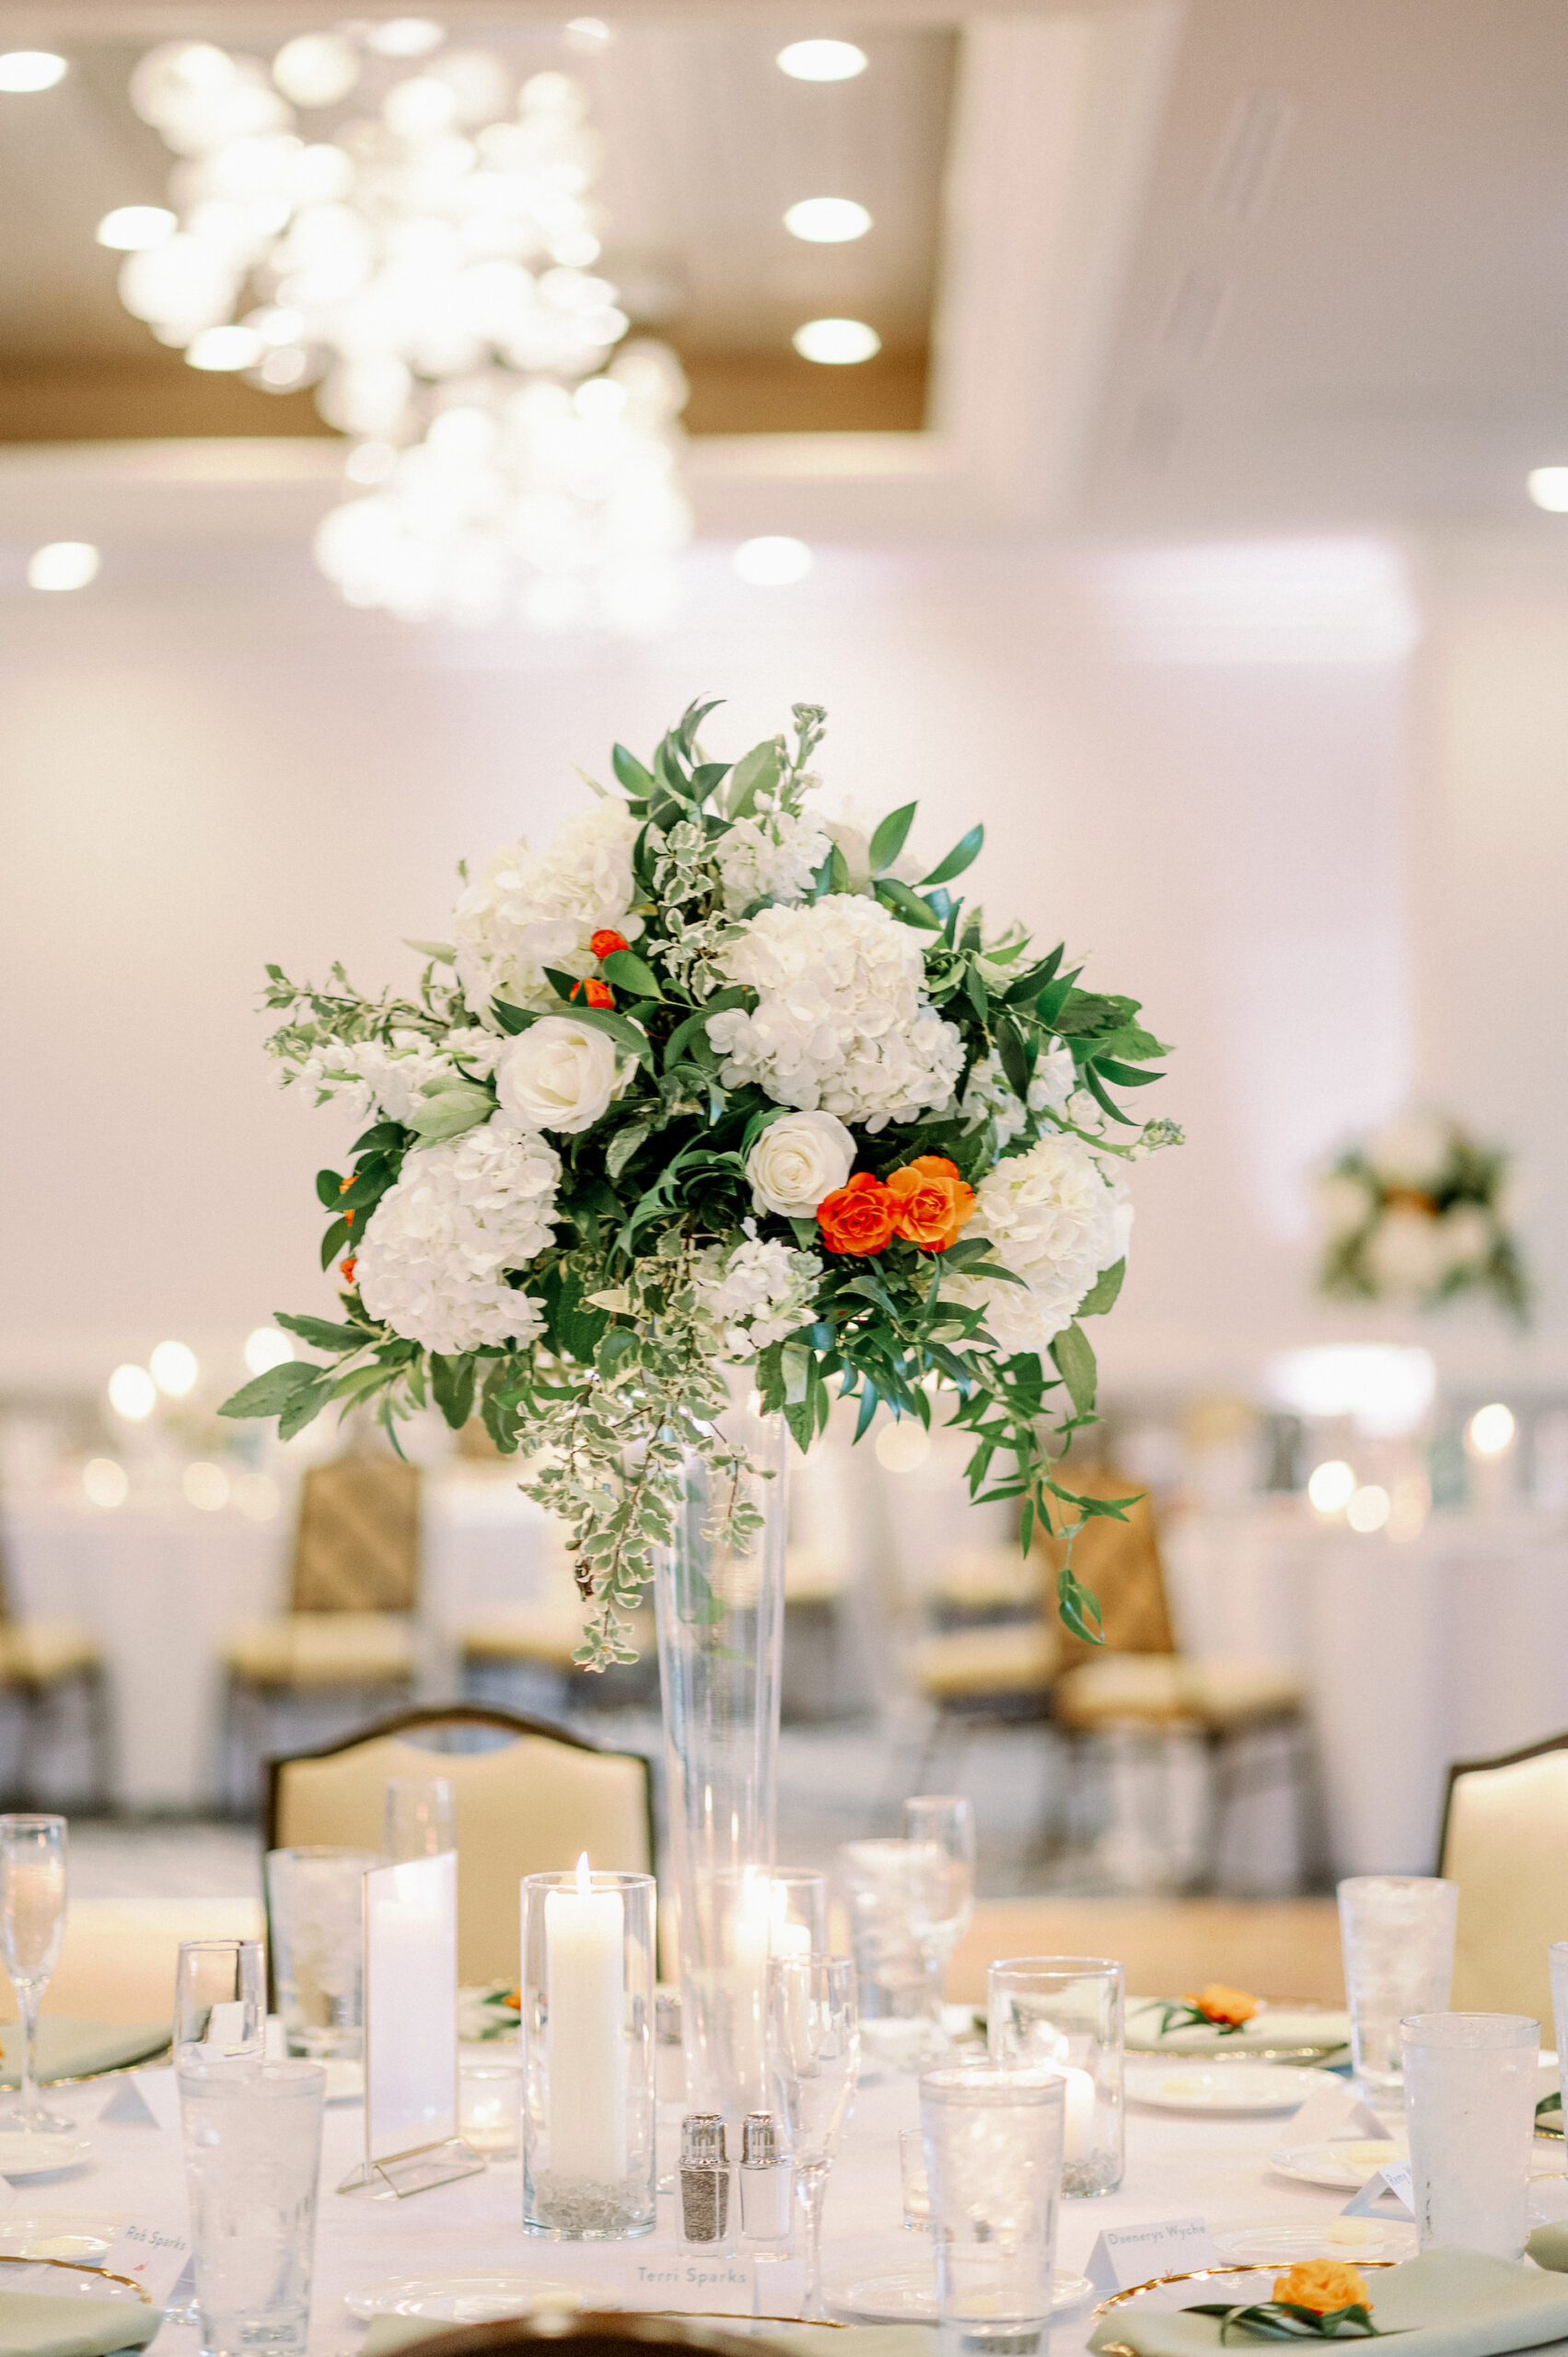 Tall Floral Centerpieces with White and Orange Florals and Greenery